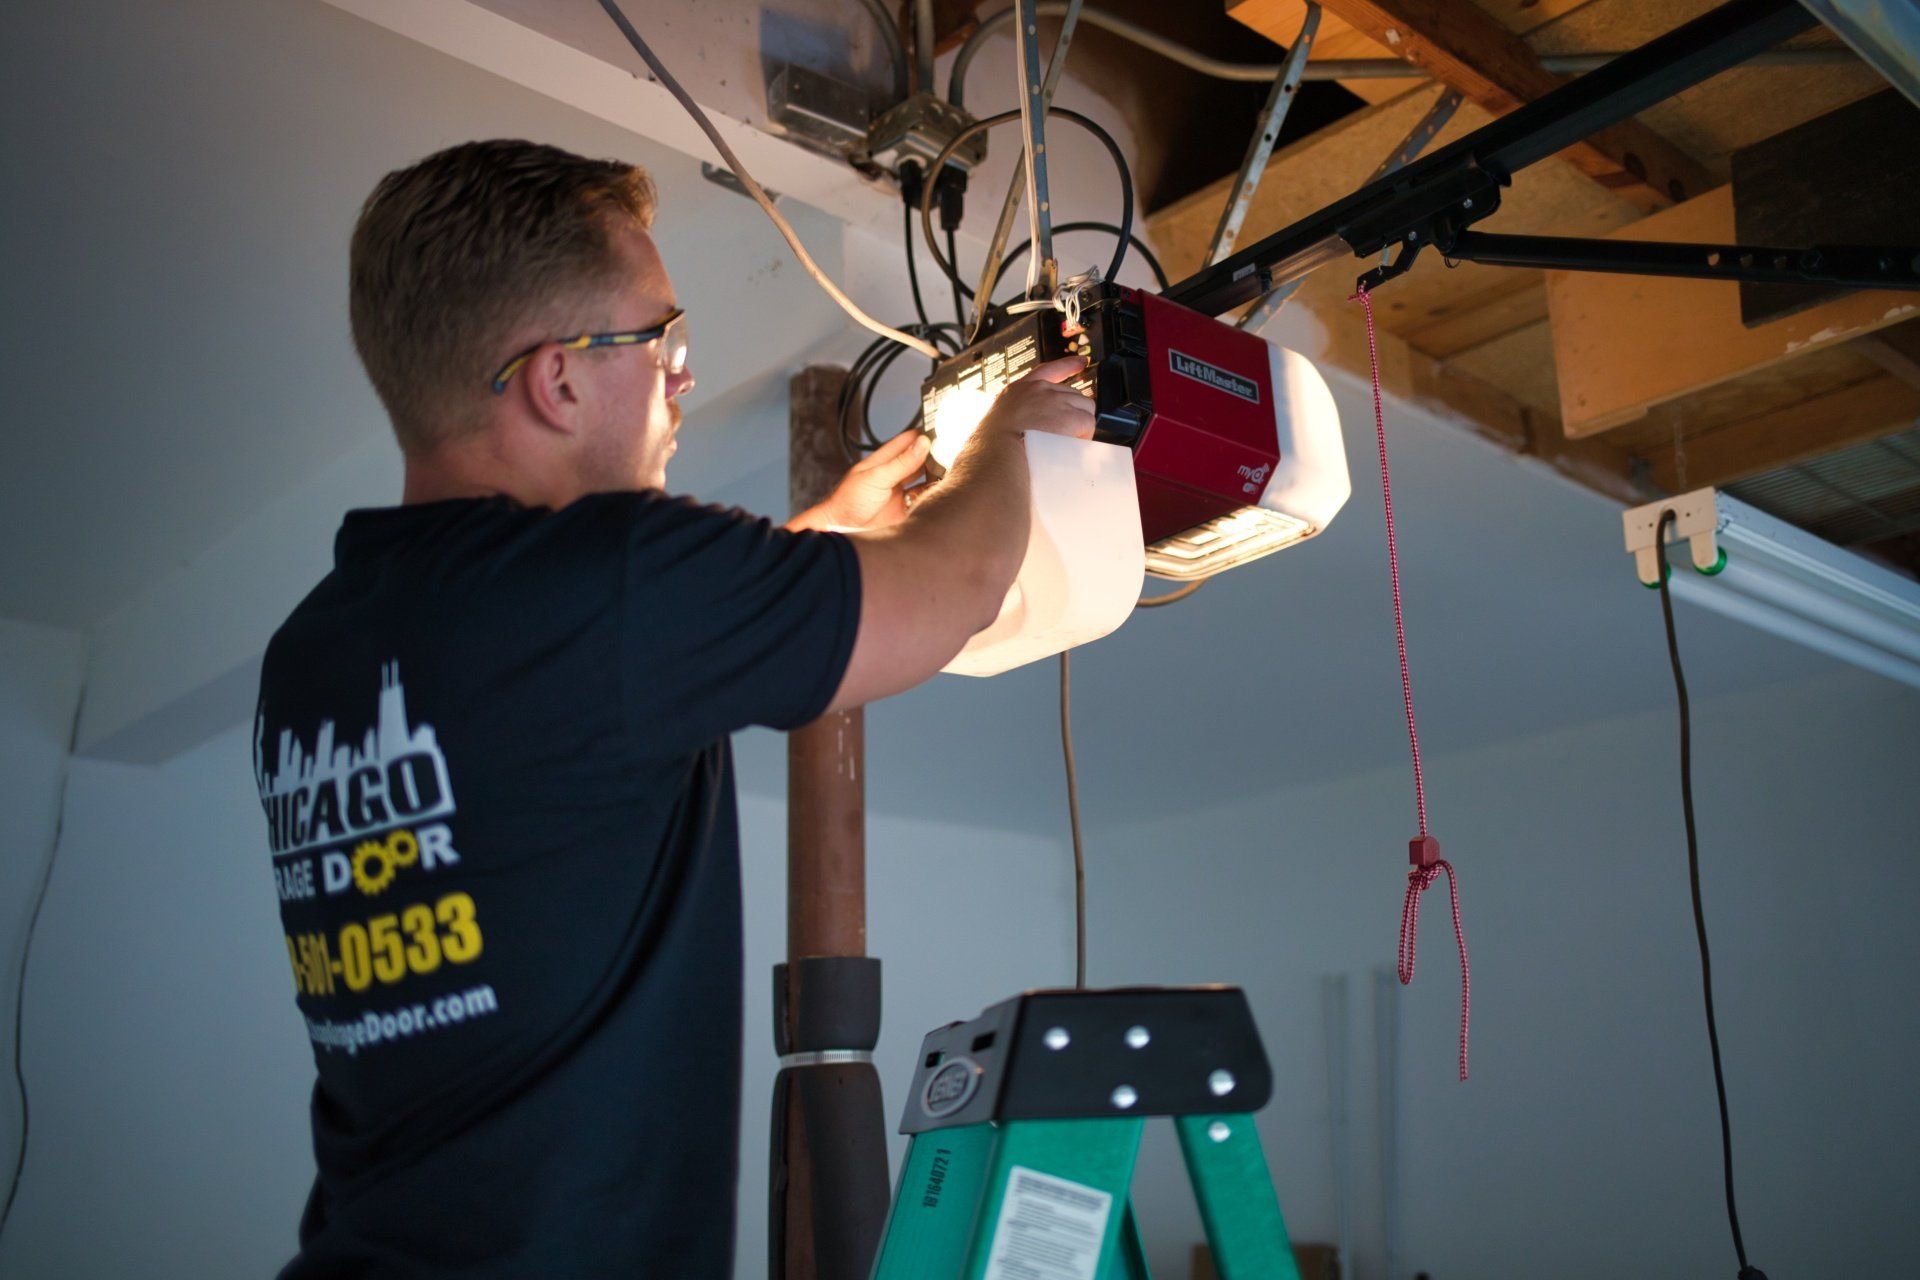 Residential garage door repair and installation in Glendale Heights, IL